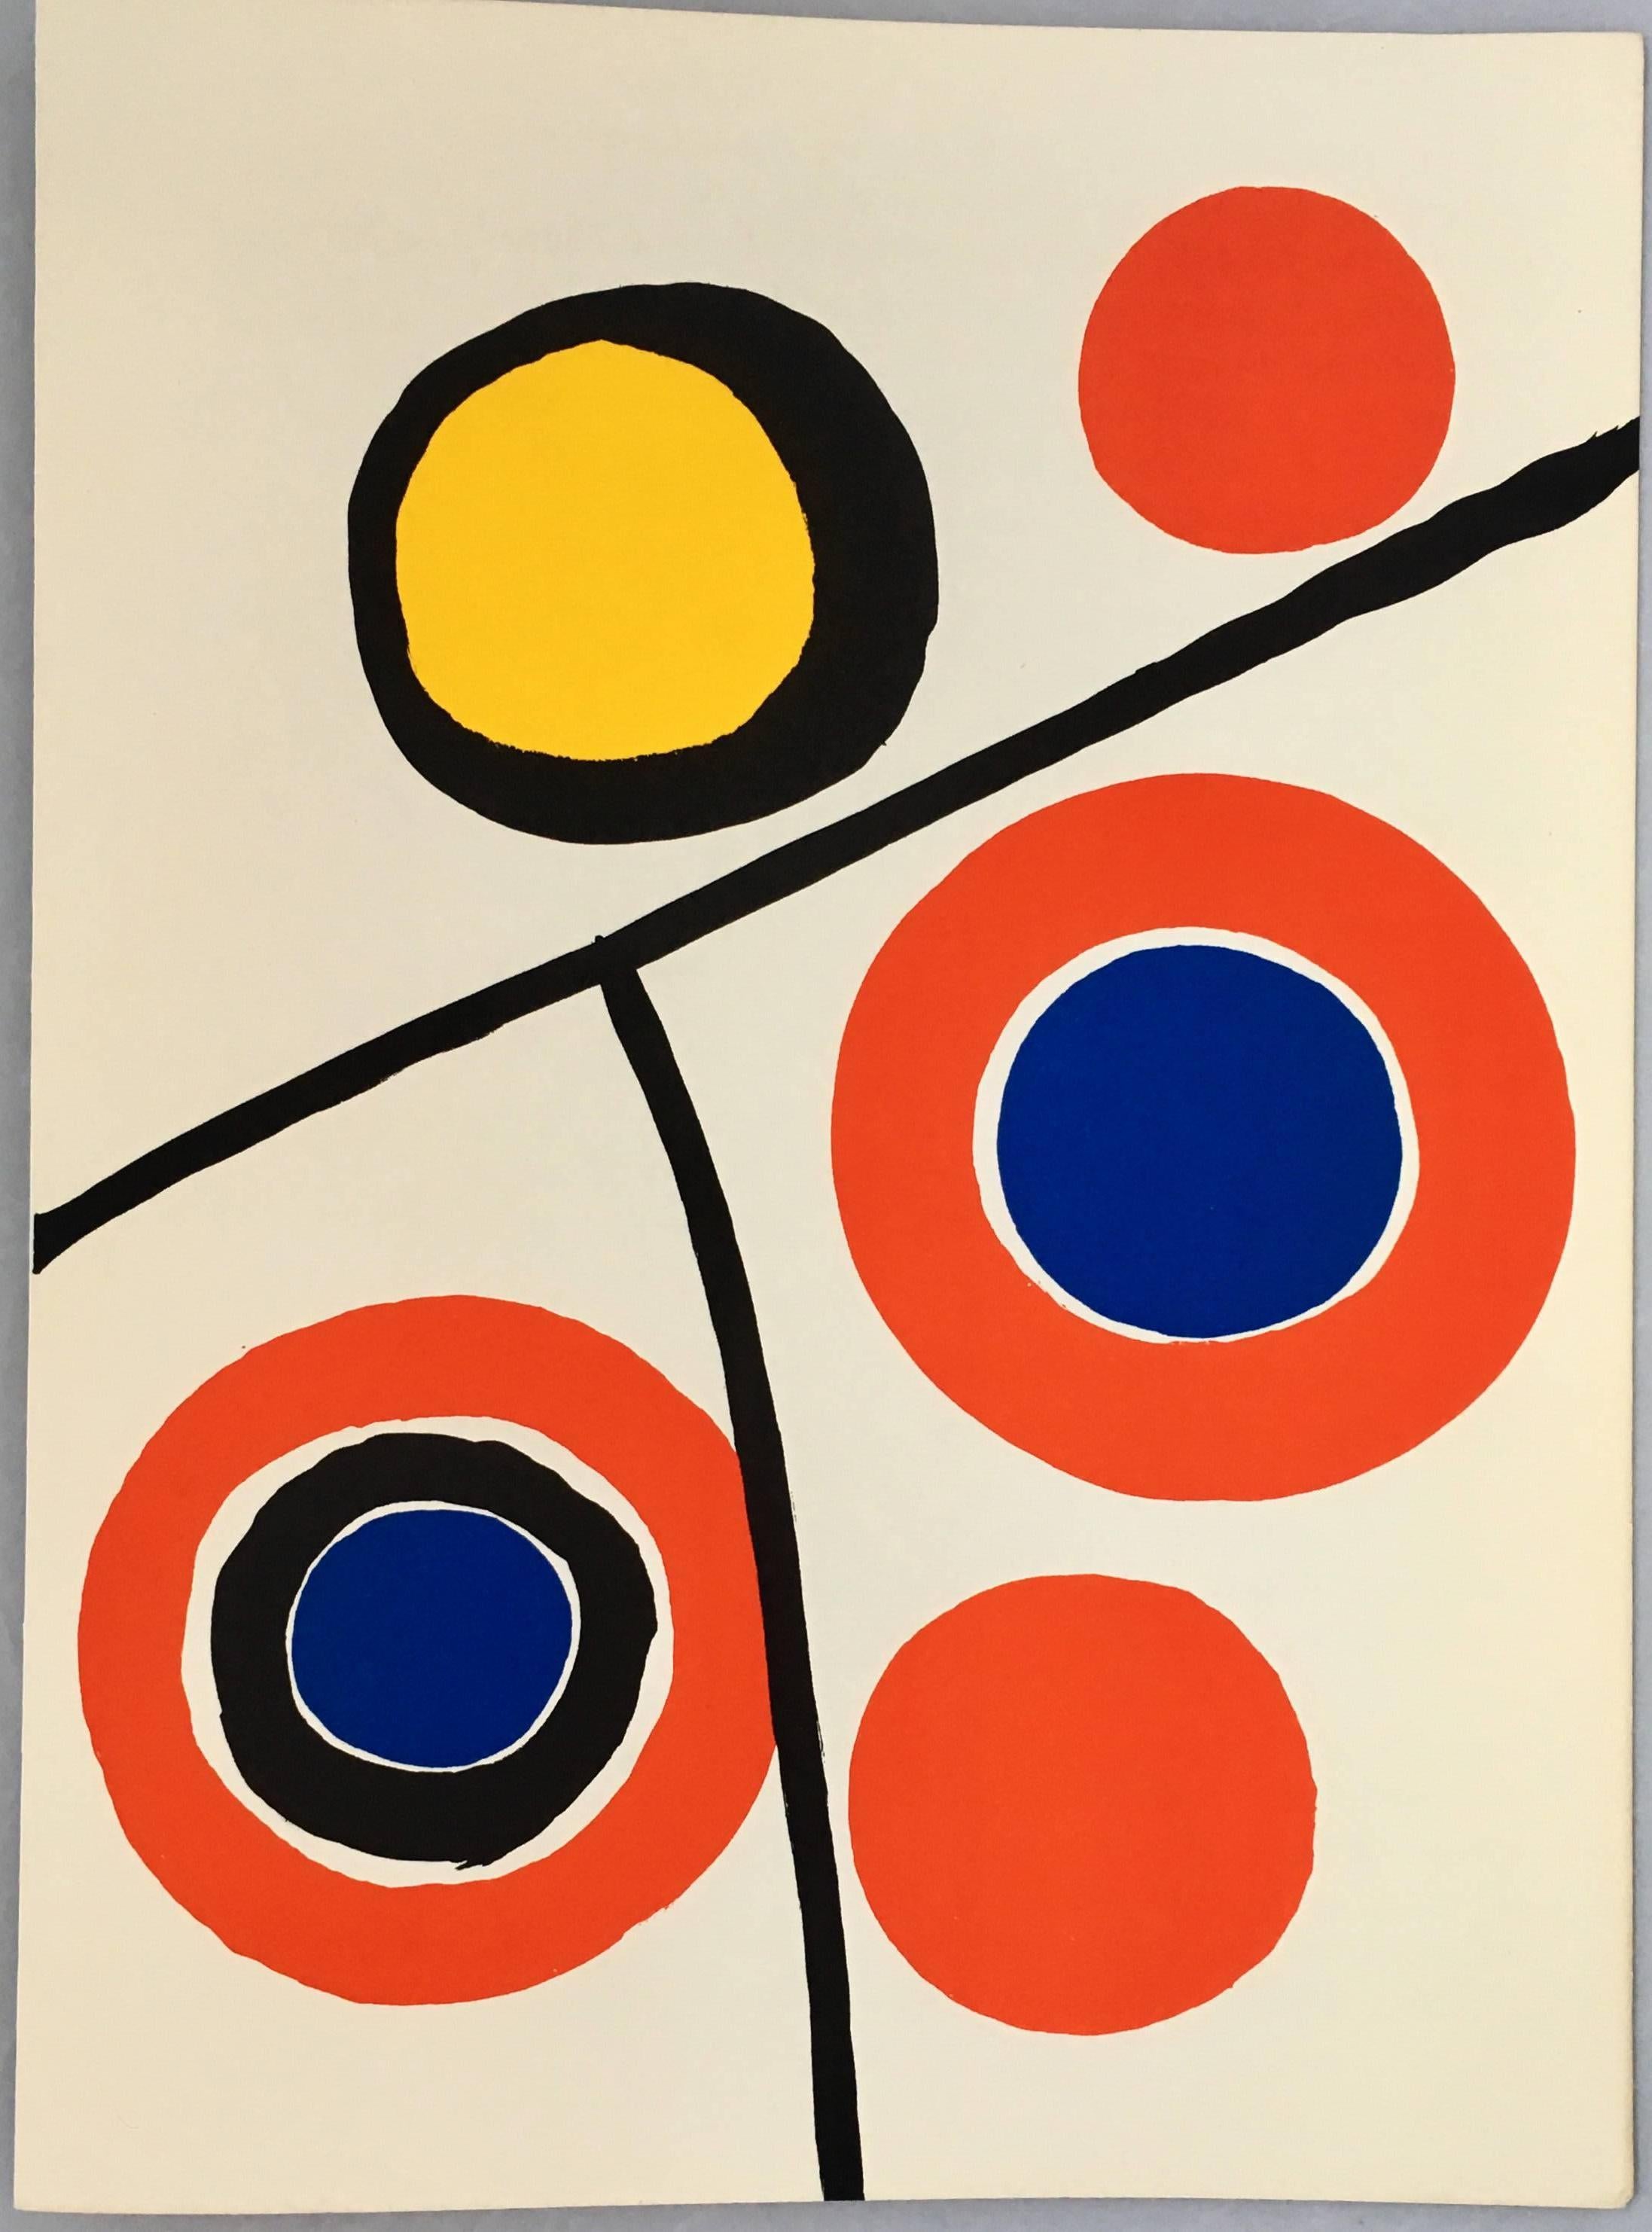 Alexander Calder Lithograph 1973:

Lithograph in colors; 11 x 15 inches.
Very good overall vintage condition.
Unsigned from an edition of unknown.
Portfolio: Derrière le miroir Published France, 1973.

Derrière le miroir:
In October 1945 the French